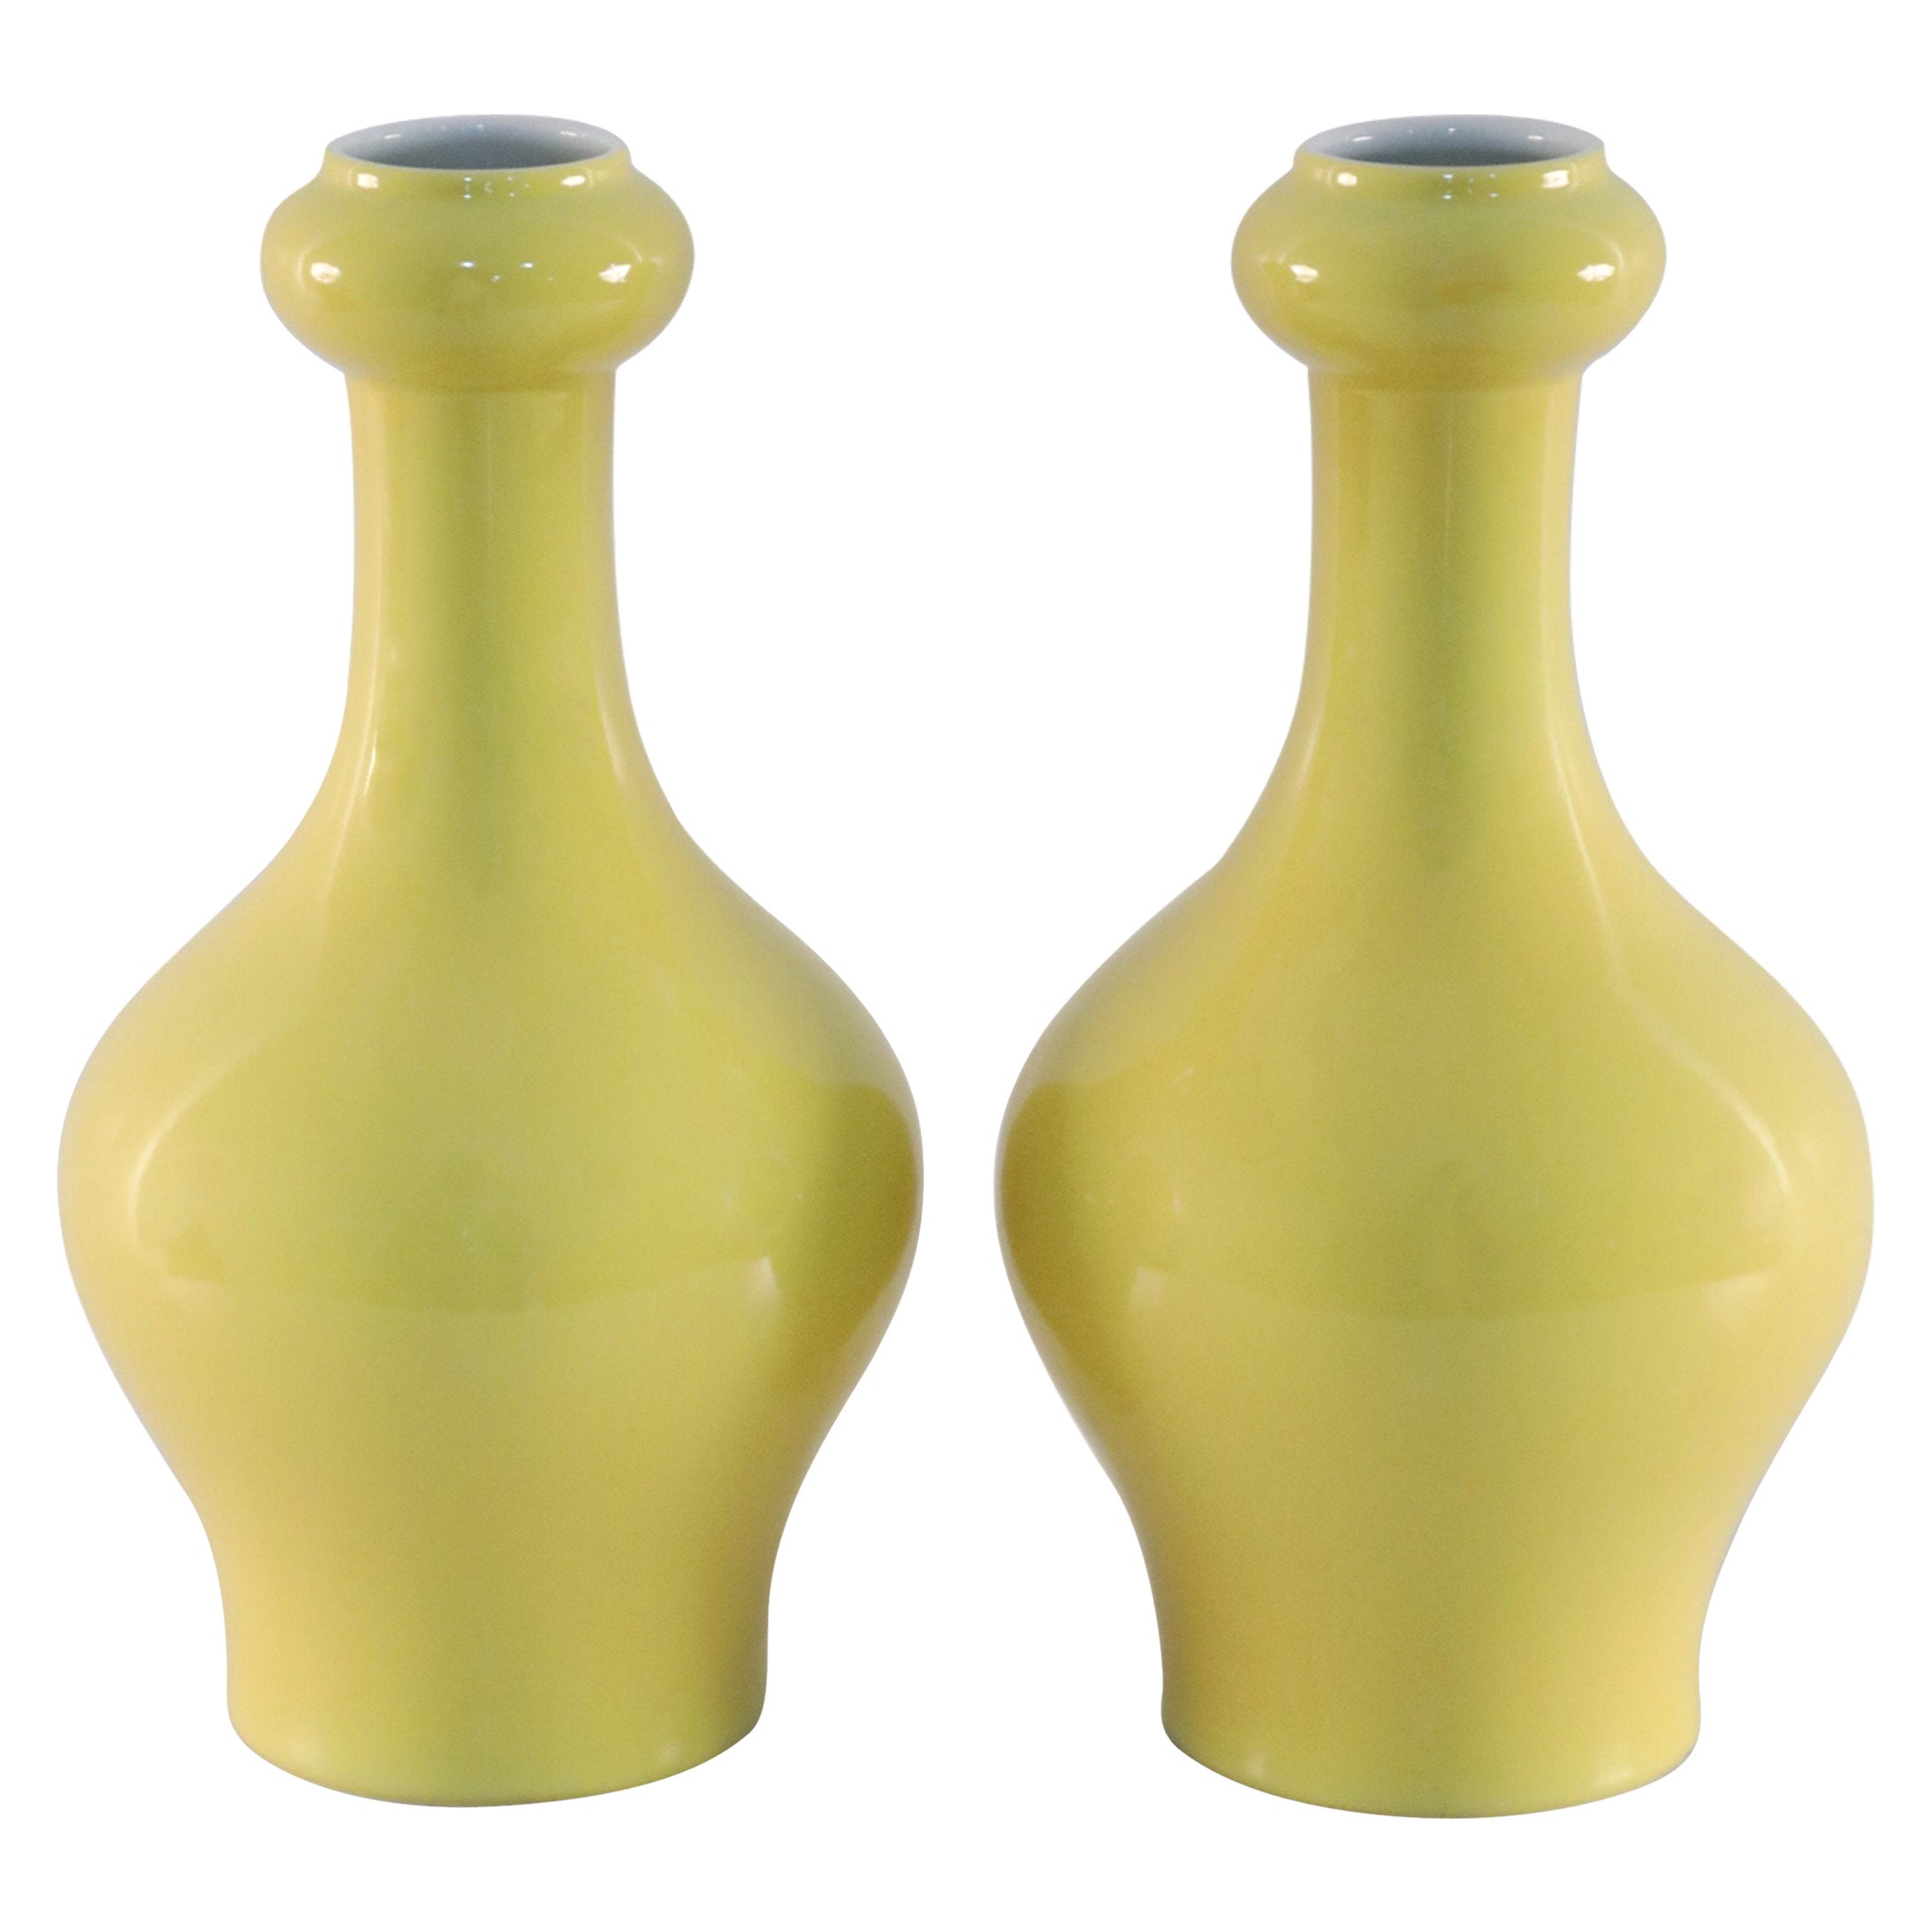 Pair of Chinese Yellow Garlic-Mouthed Porcelain Vases